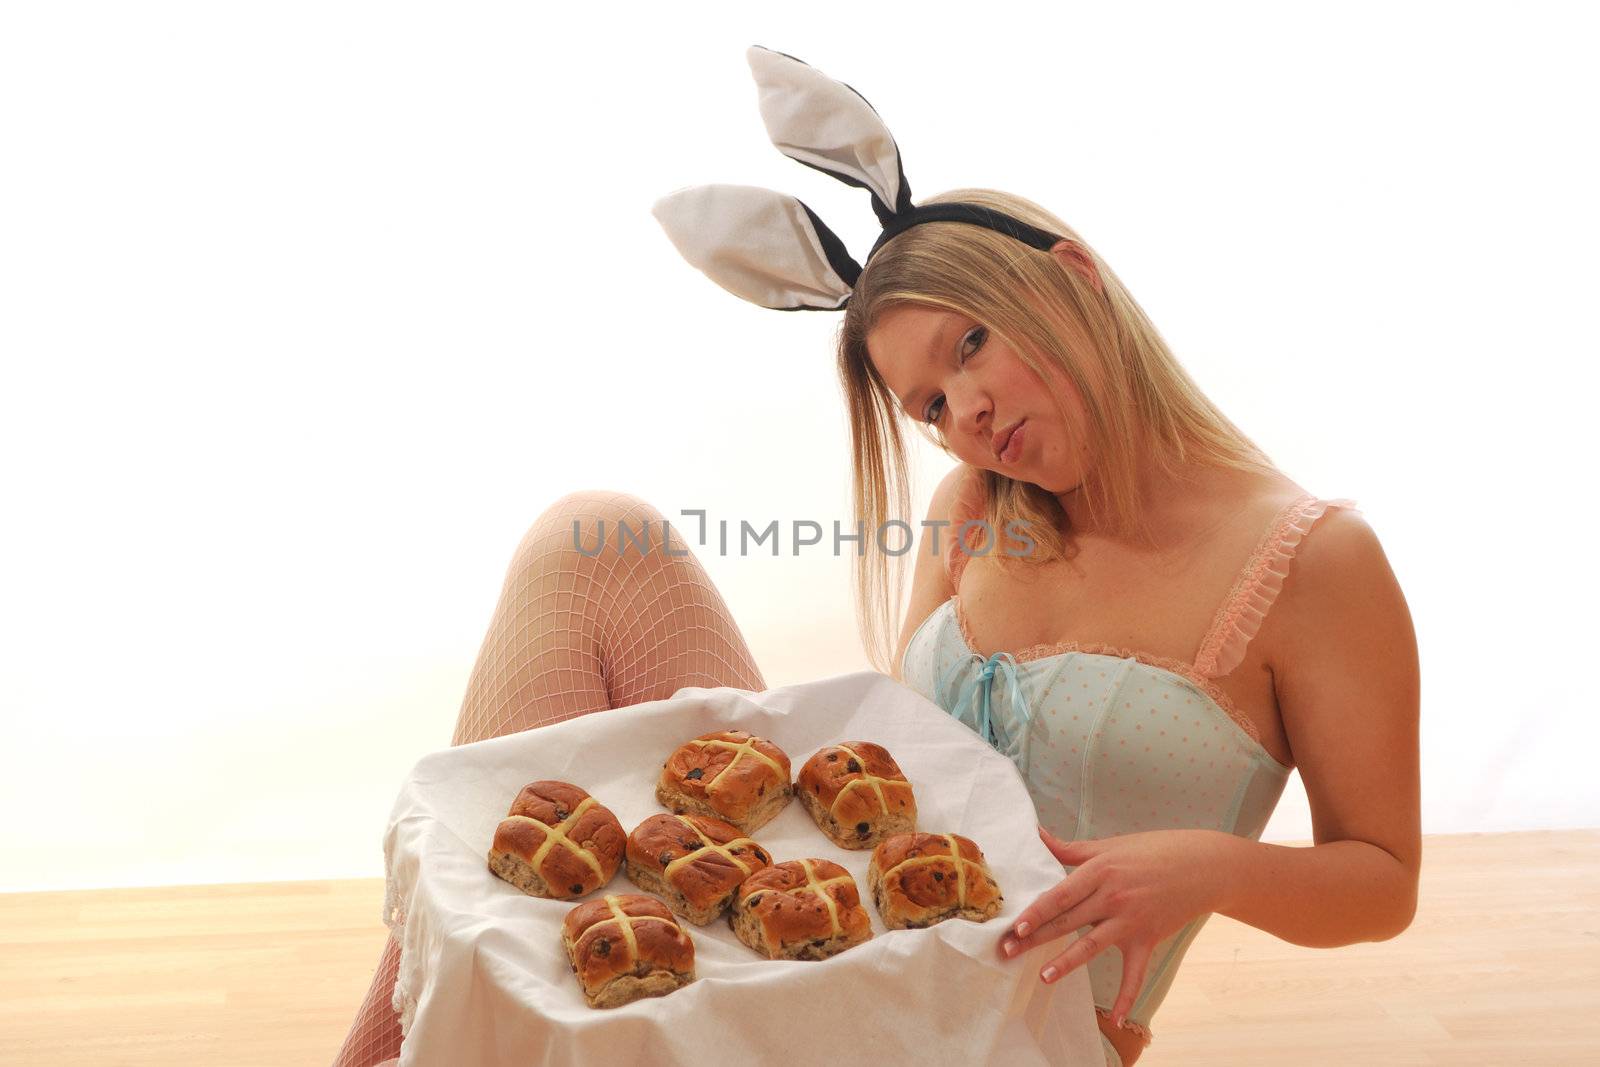 Bunny girl with tray of buns by pauws99